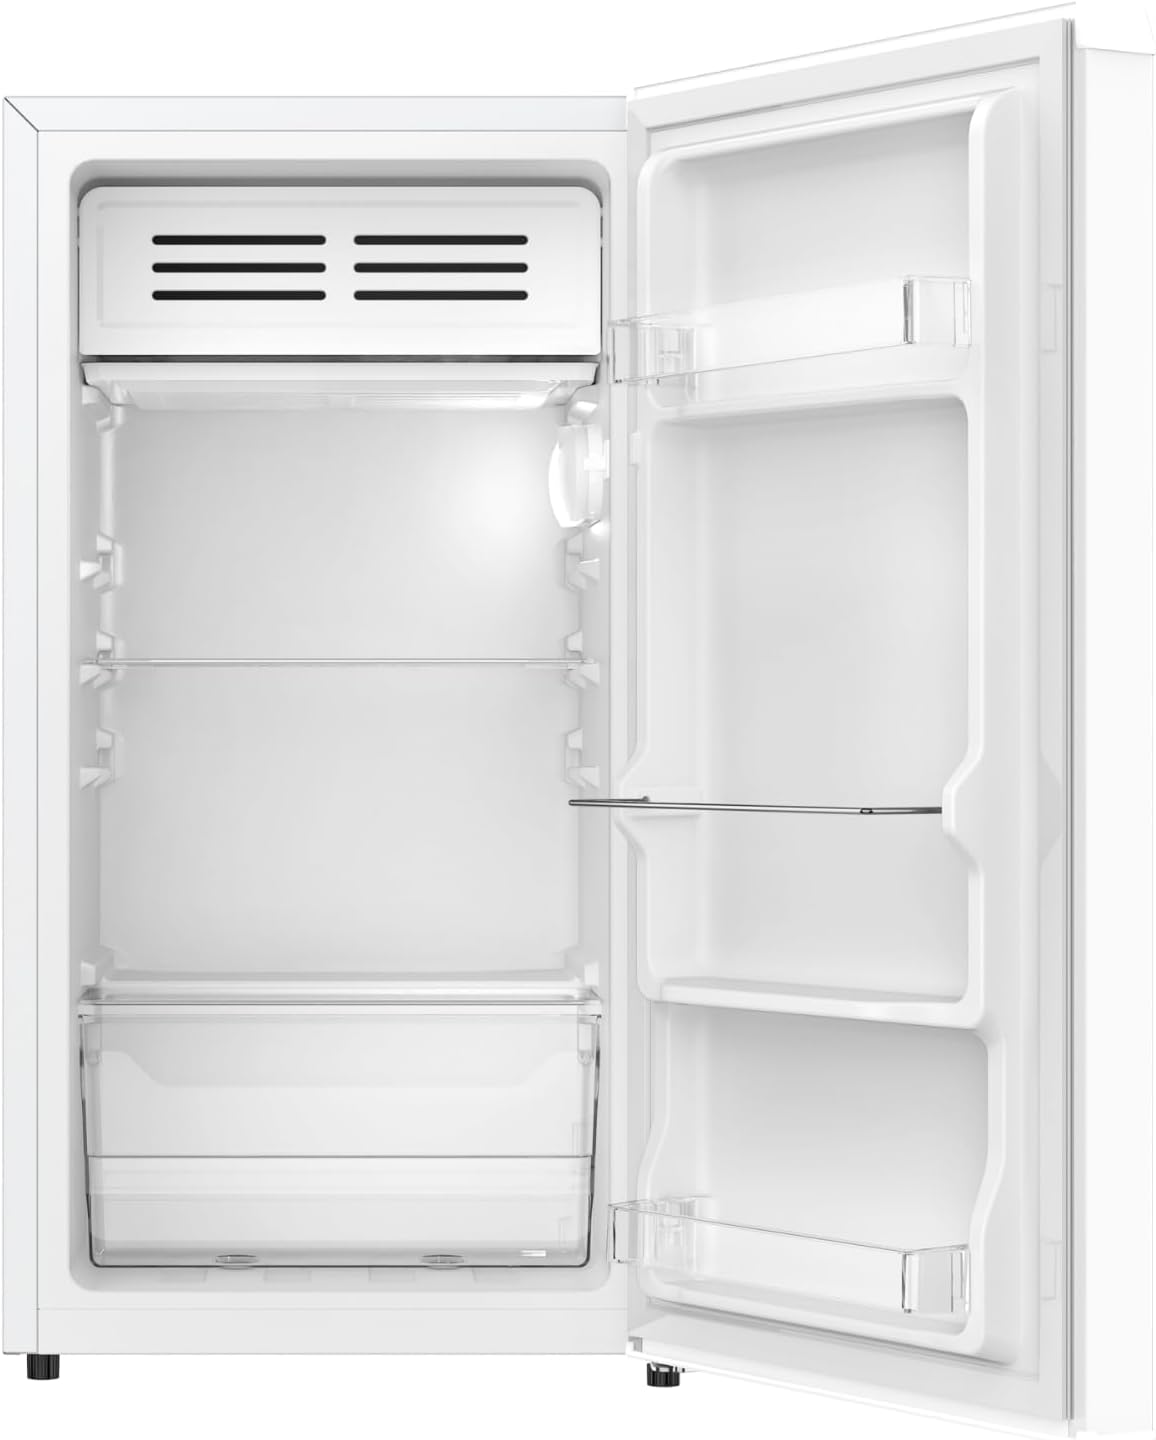 SIA SFR44WE 83L White Freestanding Under Counter Fridge With Ice Box, 2 Glass Shelves, Interior Light, E Energy Rating, 2 Year Manufacturer Warranty - Amazing Gadgets Outlet